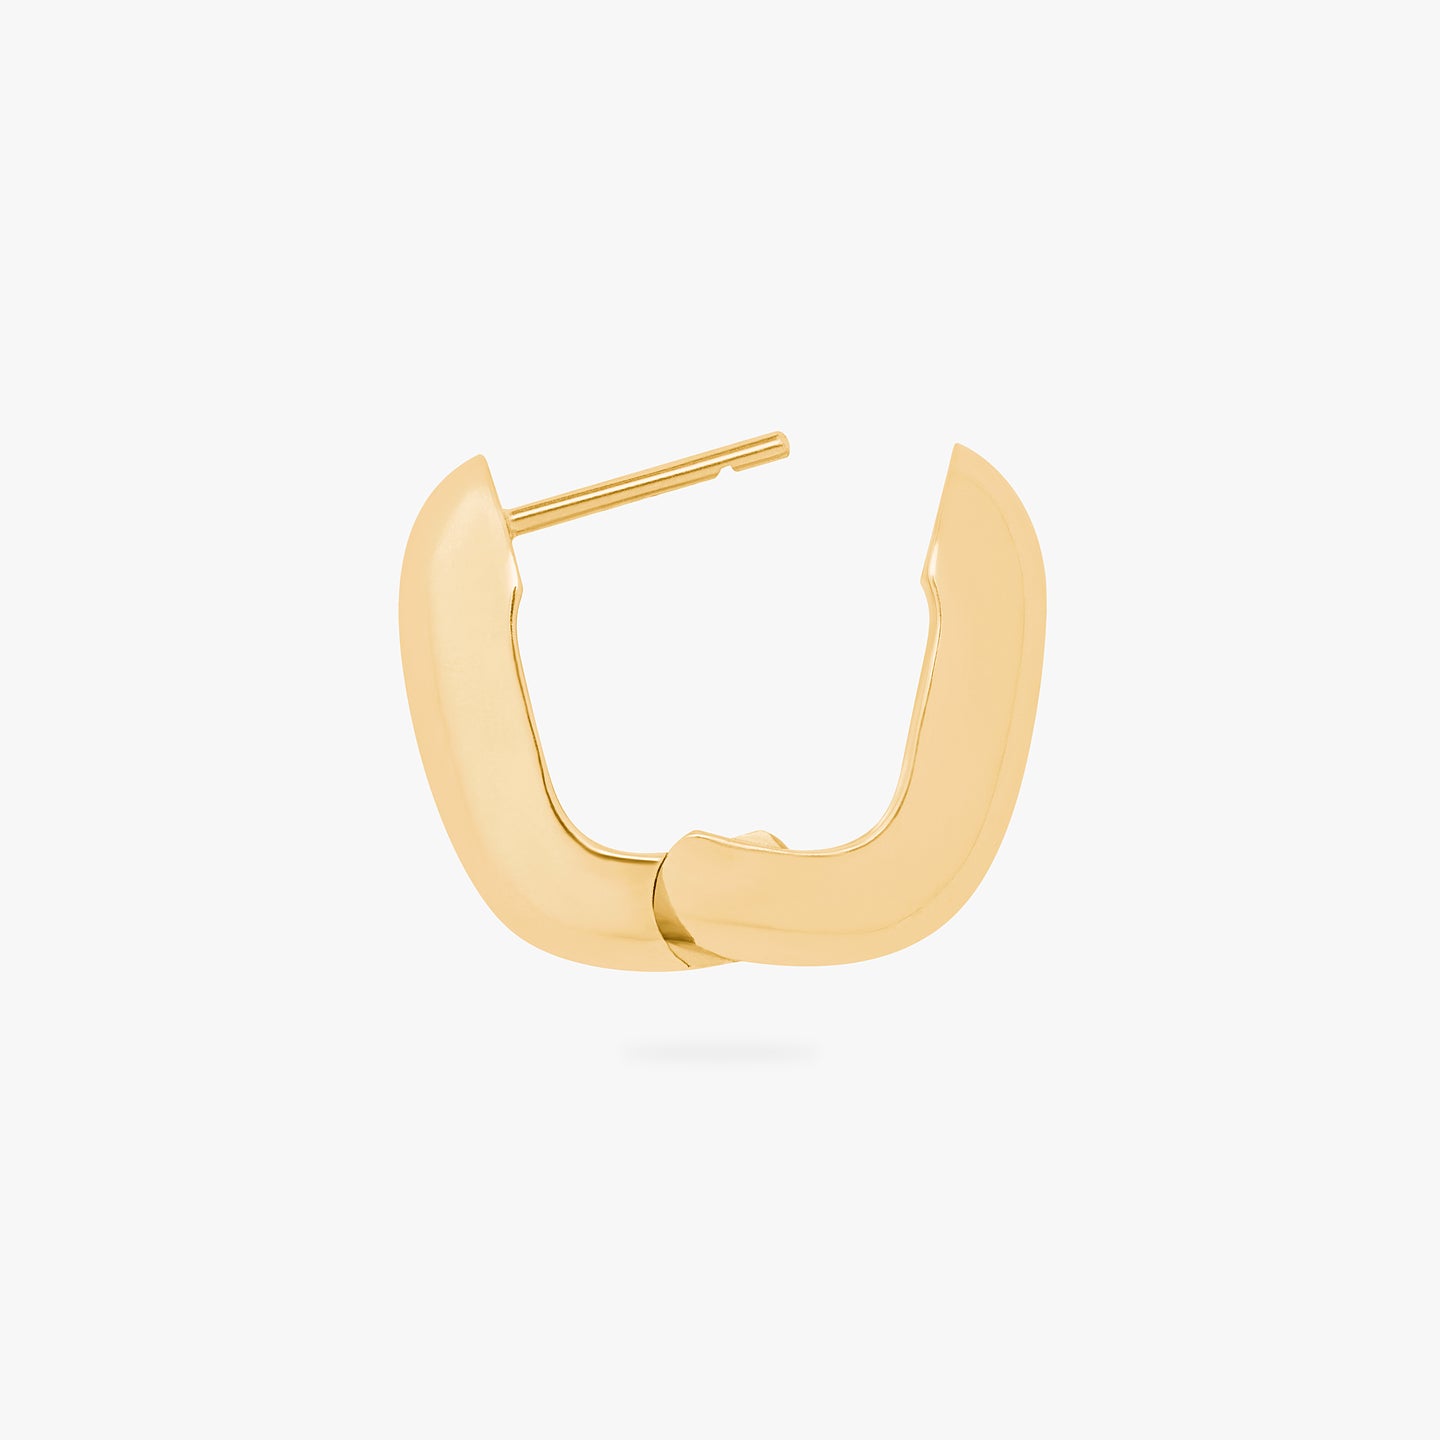 An image of a gold, chunky, square shaped huggie unhinged. color:null|gold